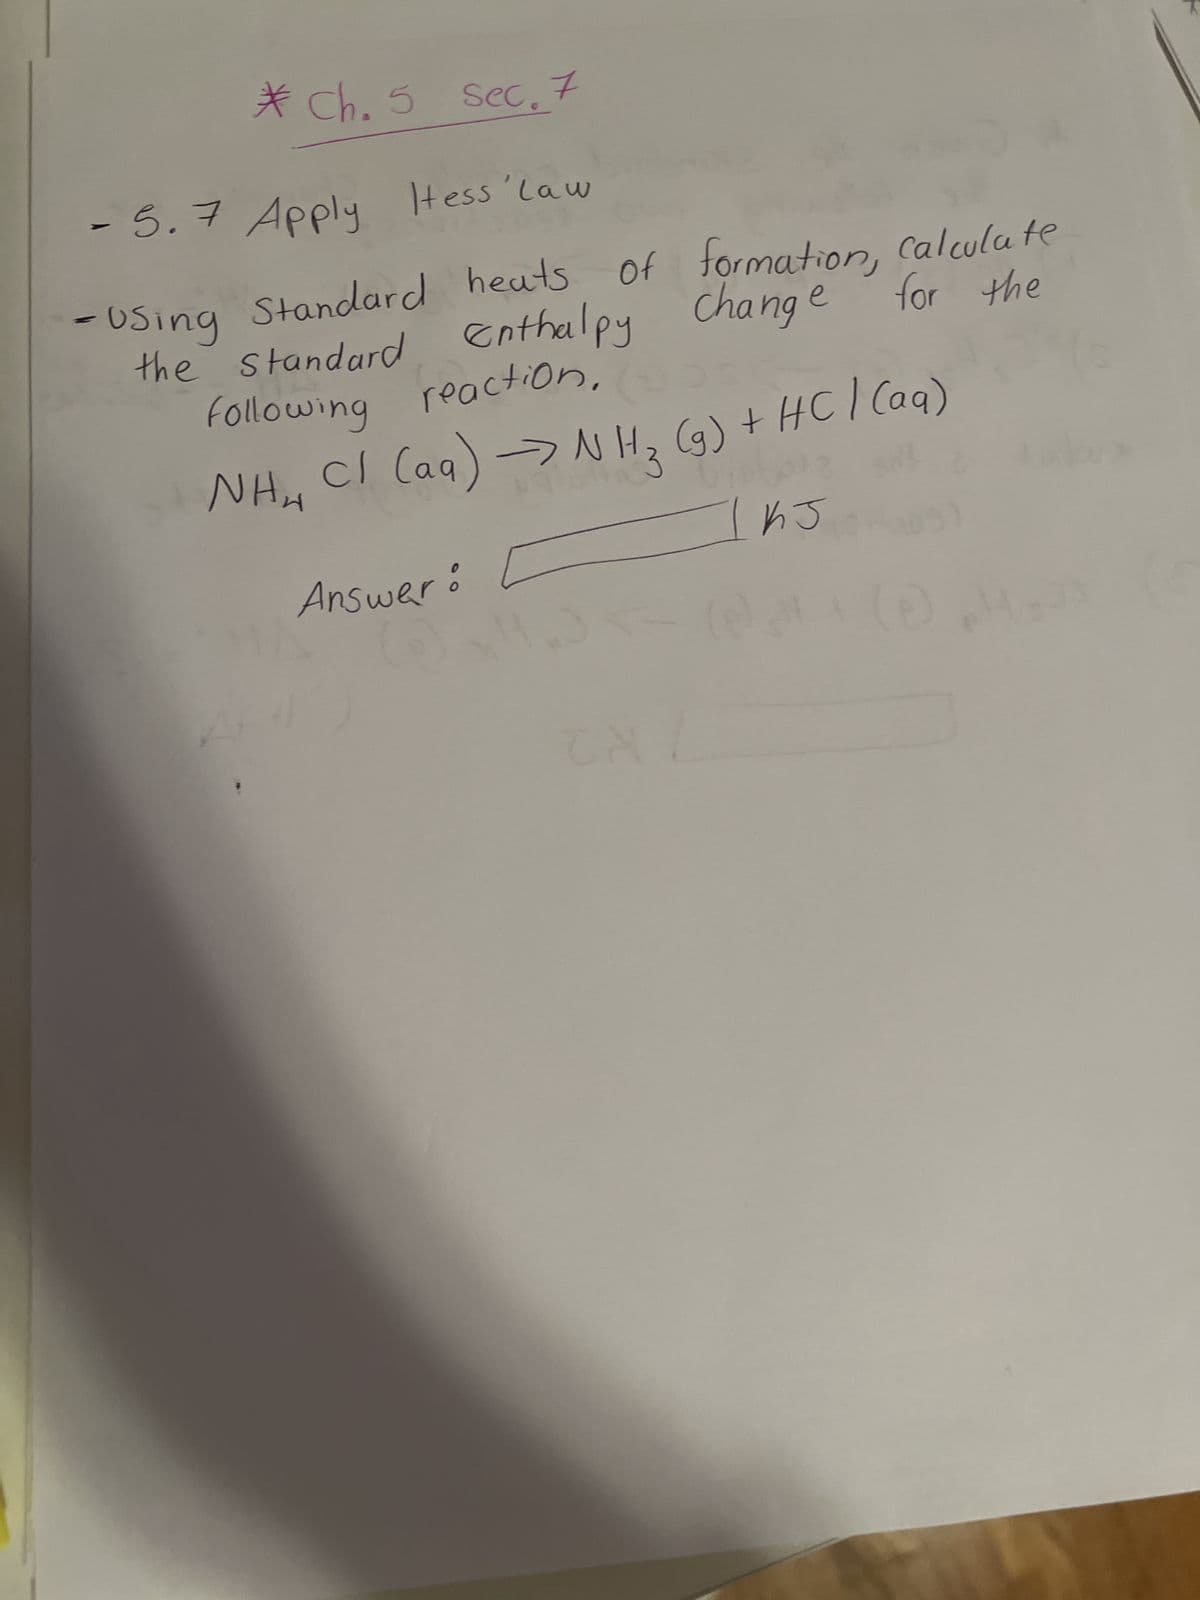 * Ch. 5 sec. 7
- 5.7 Apply Hess law
-Using Standard heats
the standard Enthalpy
following reaction.
NH,
=
heats of formation, calculate
for the
Enthalpy Change
Cl(aq) → NH₂ (g) + HCl(aq)
13
Answer
0
TH
nJ1
D